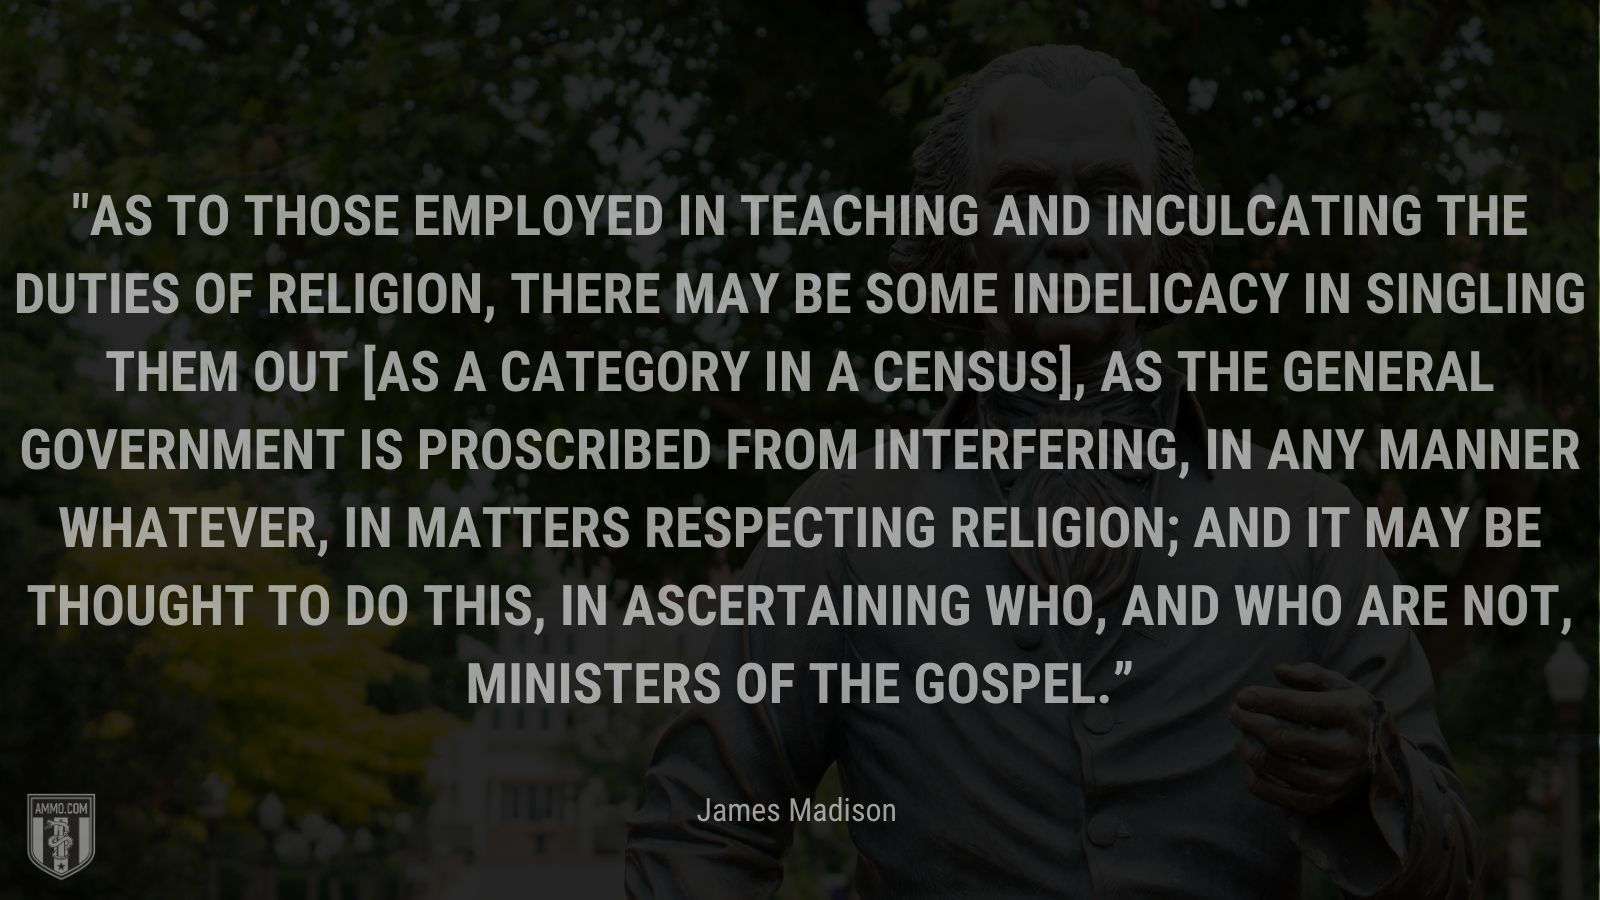 “As to those employed in teaching and inculcating the duties of religion, there may be some indelicacy in singling them out [as a category in a census], as the general government is proscribed from interfering, in any manner whatever, in matters respecting religion; and it may be thought to do this, in ascertaining who, and who are not, ministers of the gospel.” - James Madison